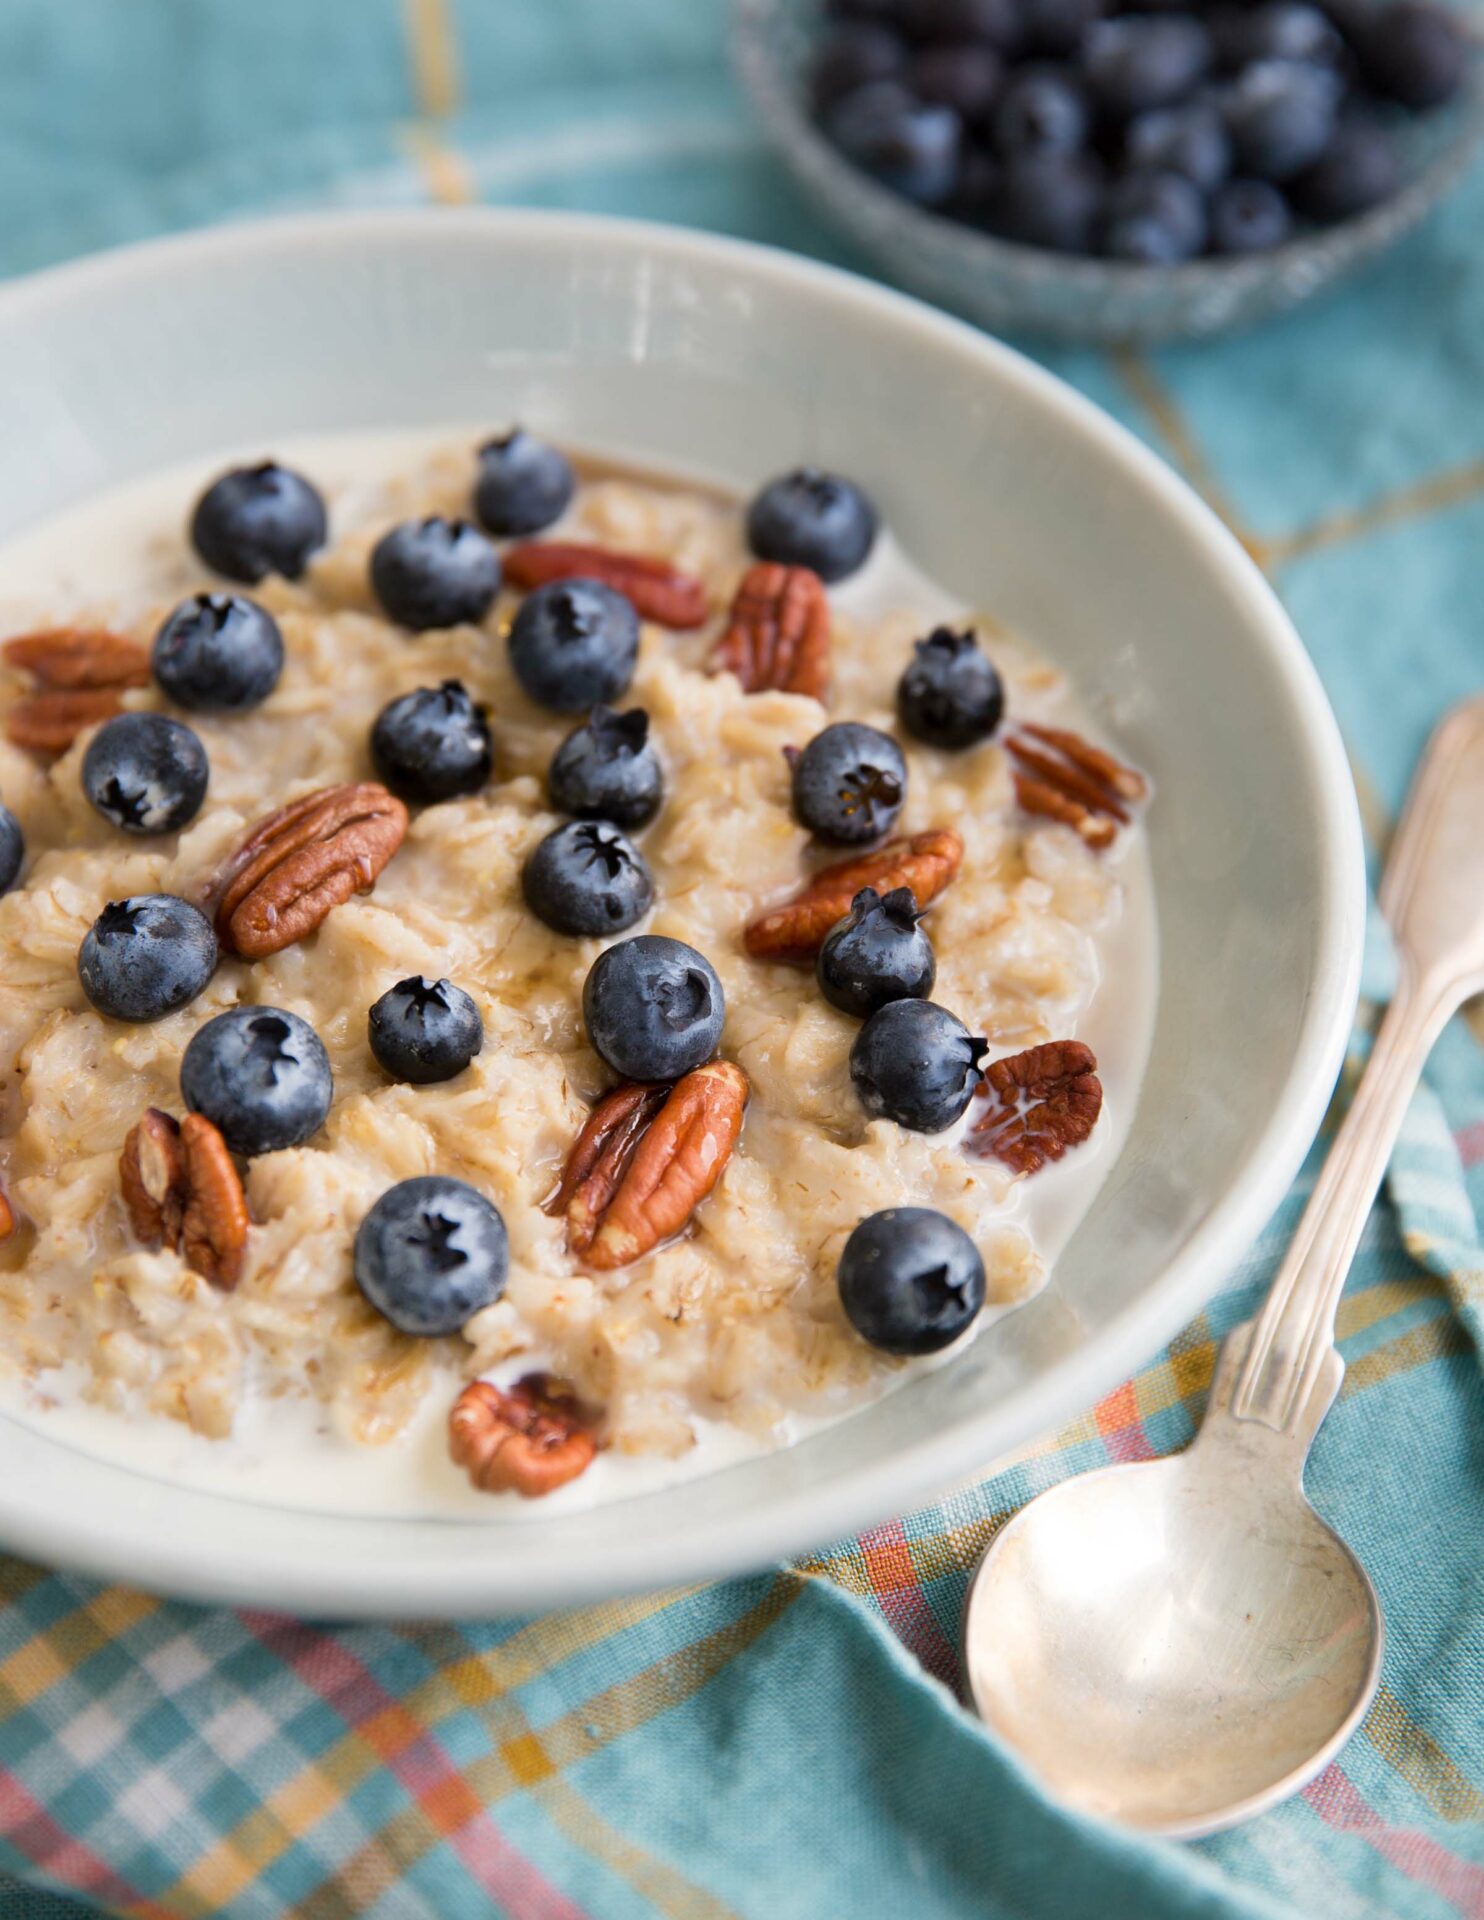 Creamy Oatmeal with Chilean Blueberries